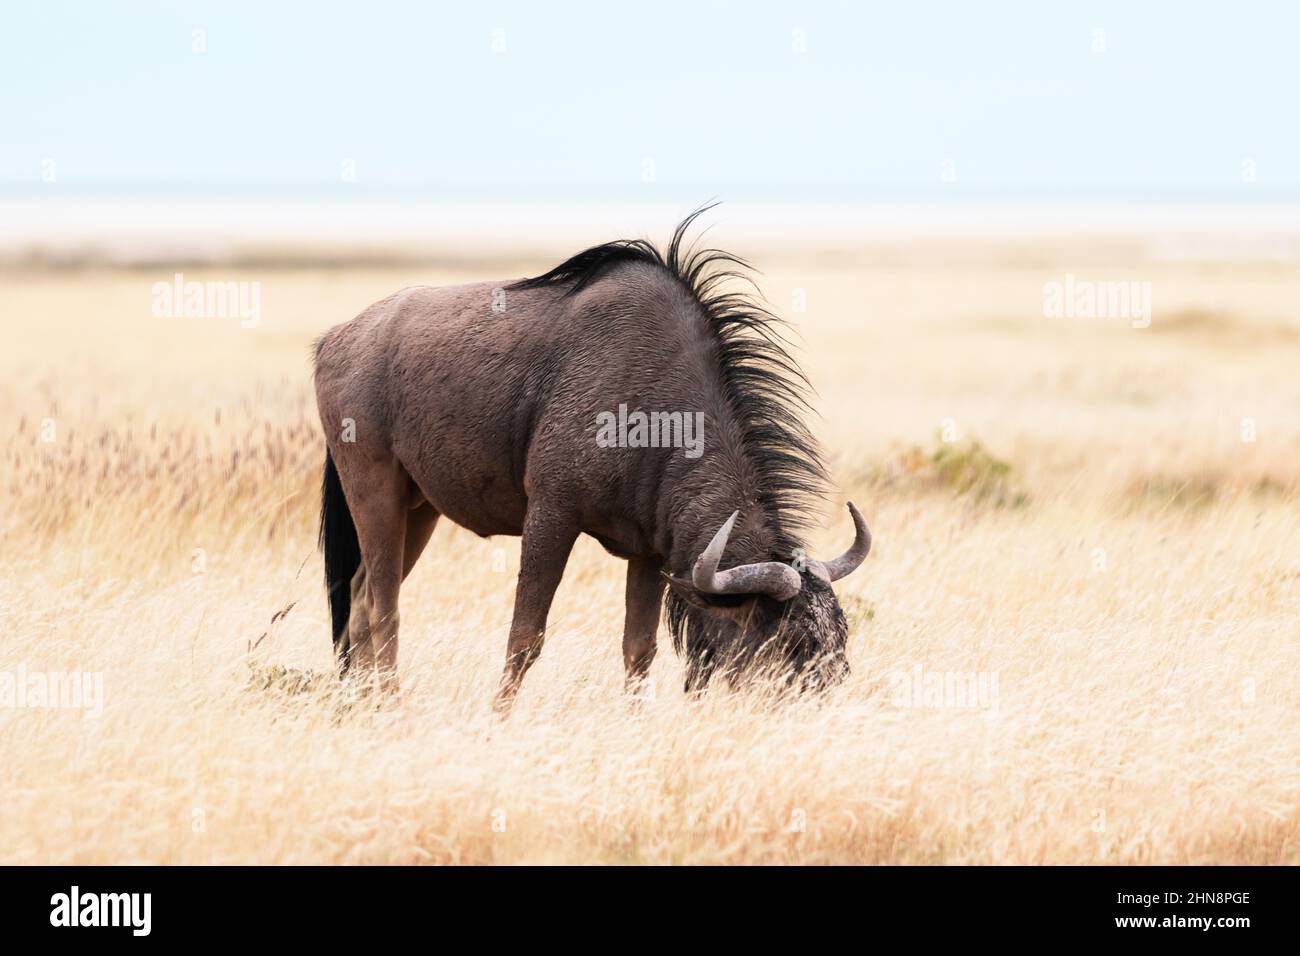 Large african antelope Gnu (Blue wildebeest, Connochaetes taurinus) walking in yellow dry grass at the evening in Namibian savanna. Wildlife photography in Africa Stock Photo